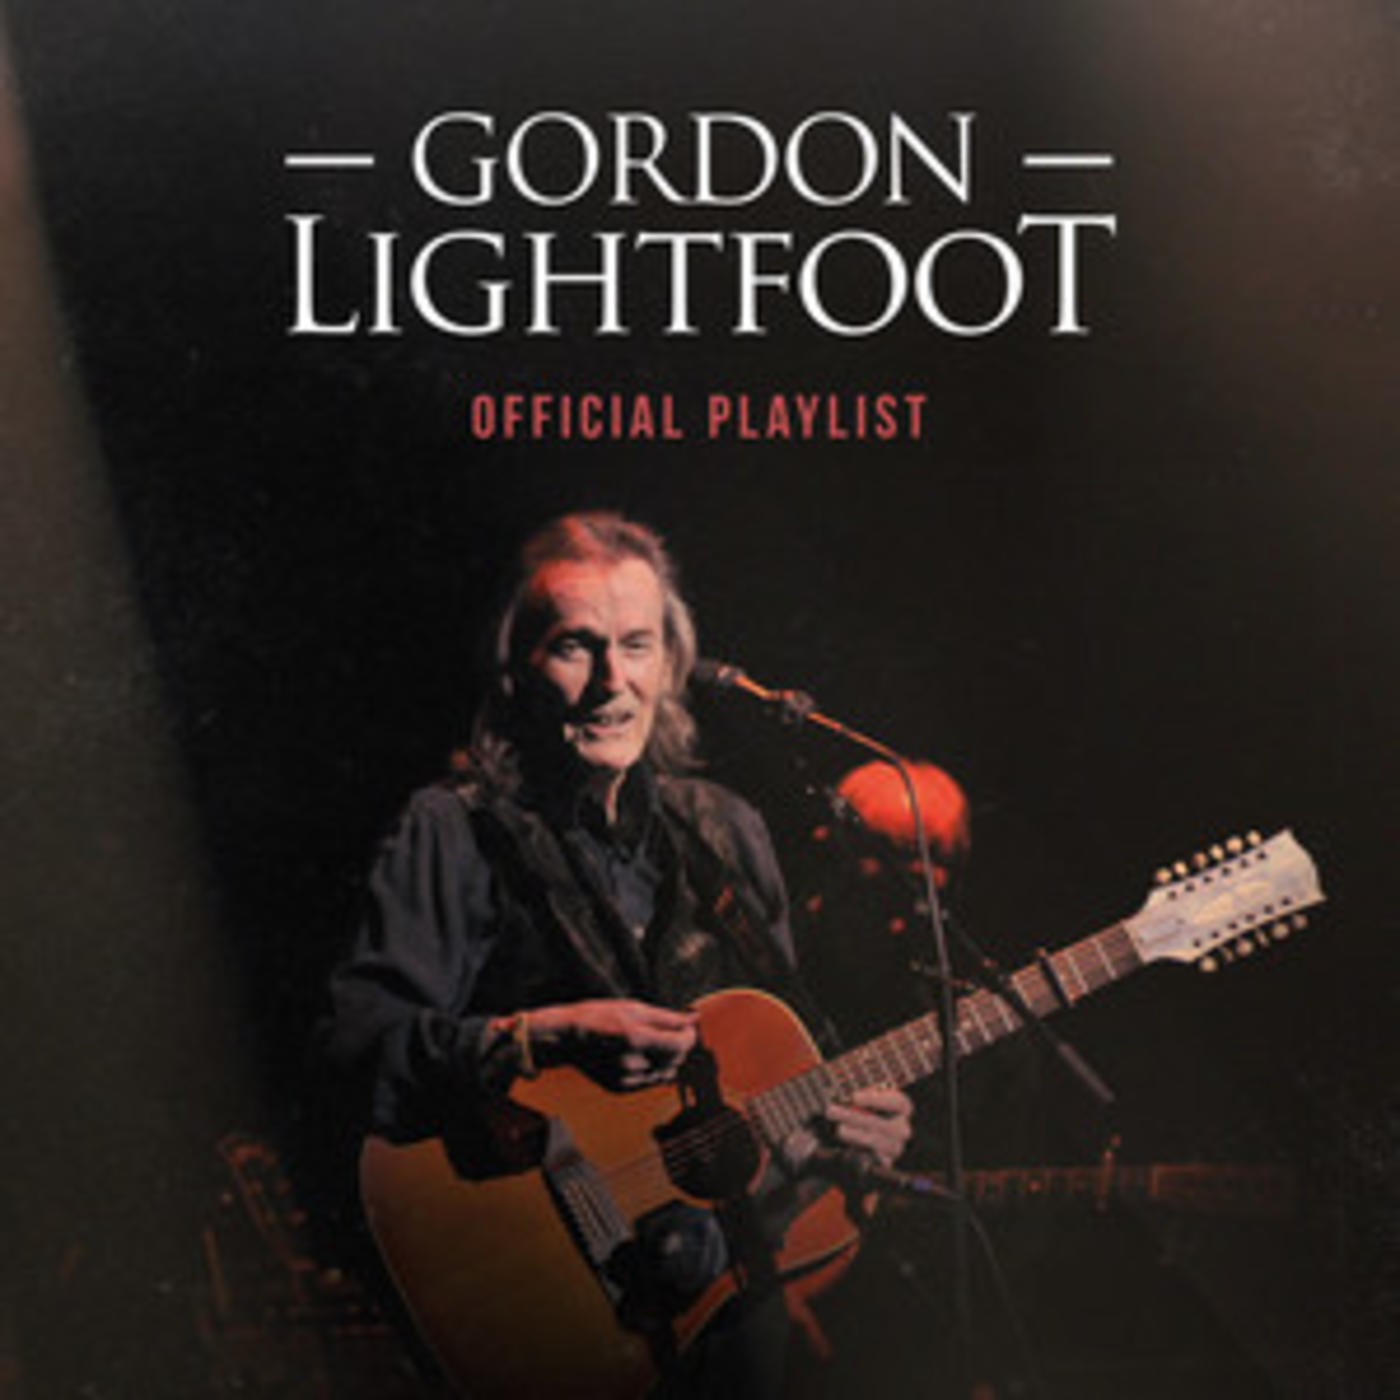 Official Gordon Lightfoot playlist - Sundown, If You Could Read My Mind, Carefree Highway, Beautiful